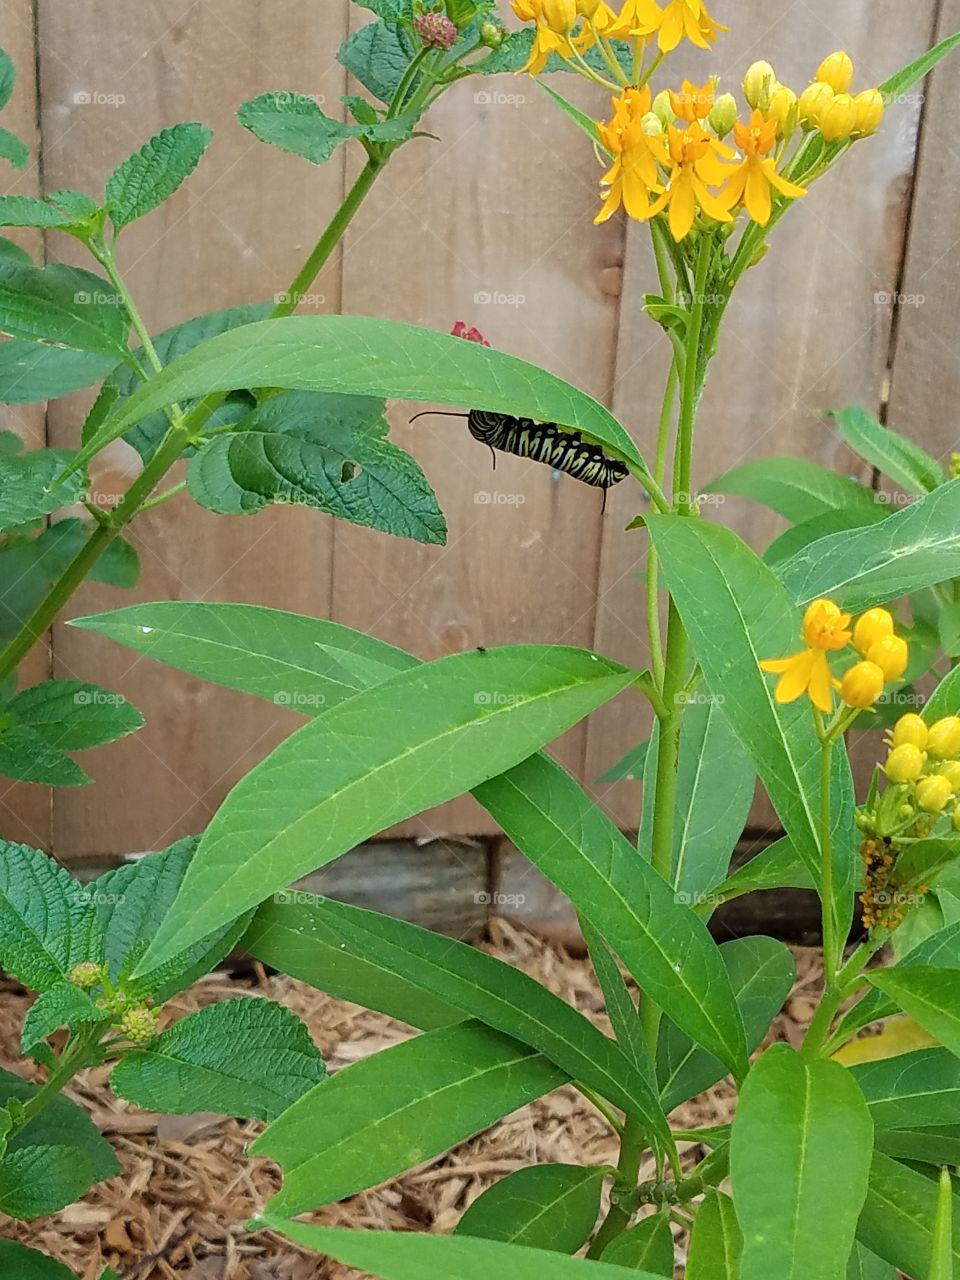 Monarch caterpillar filling up for its metamorphosis